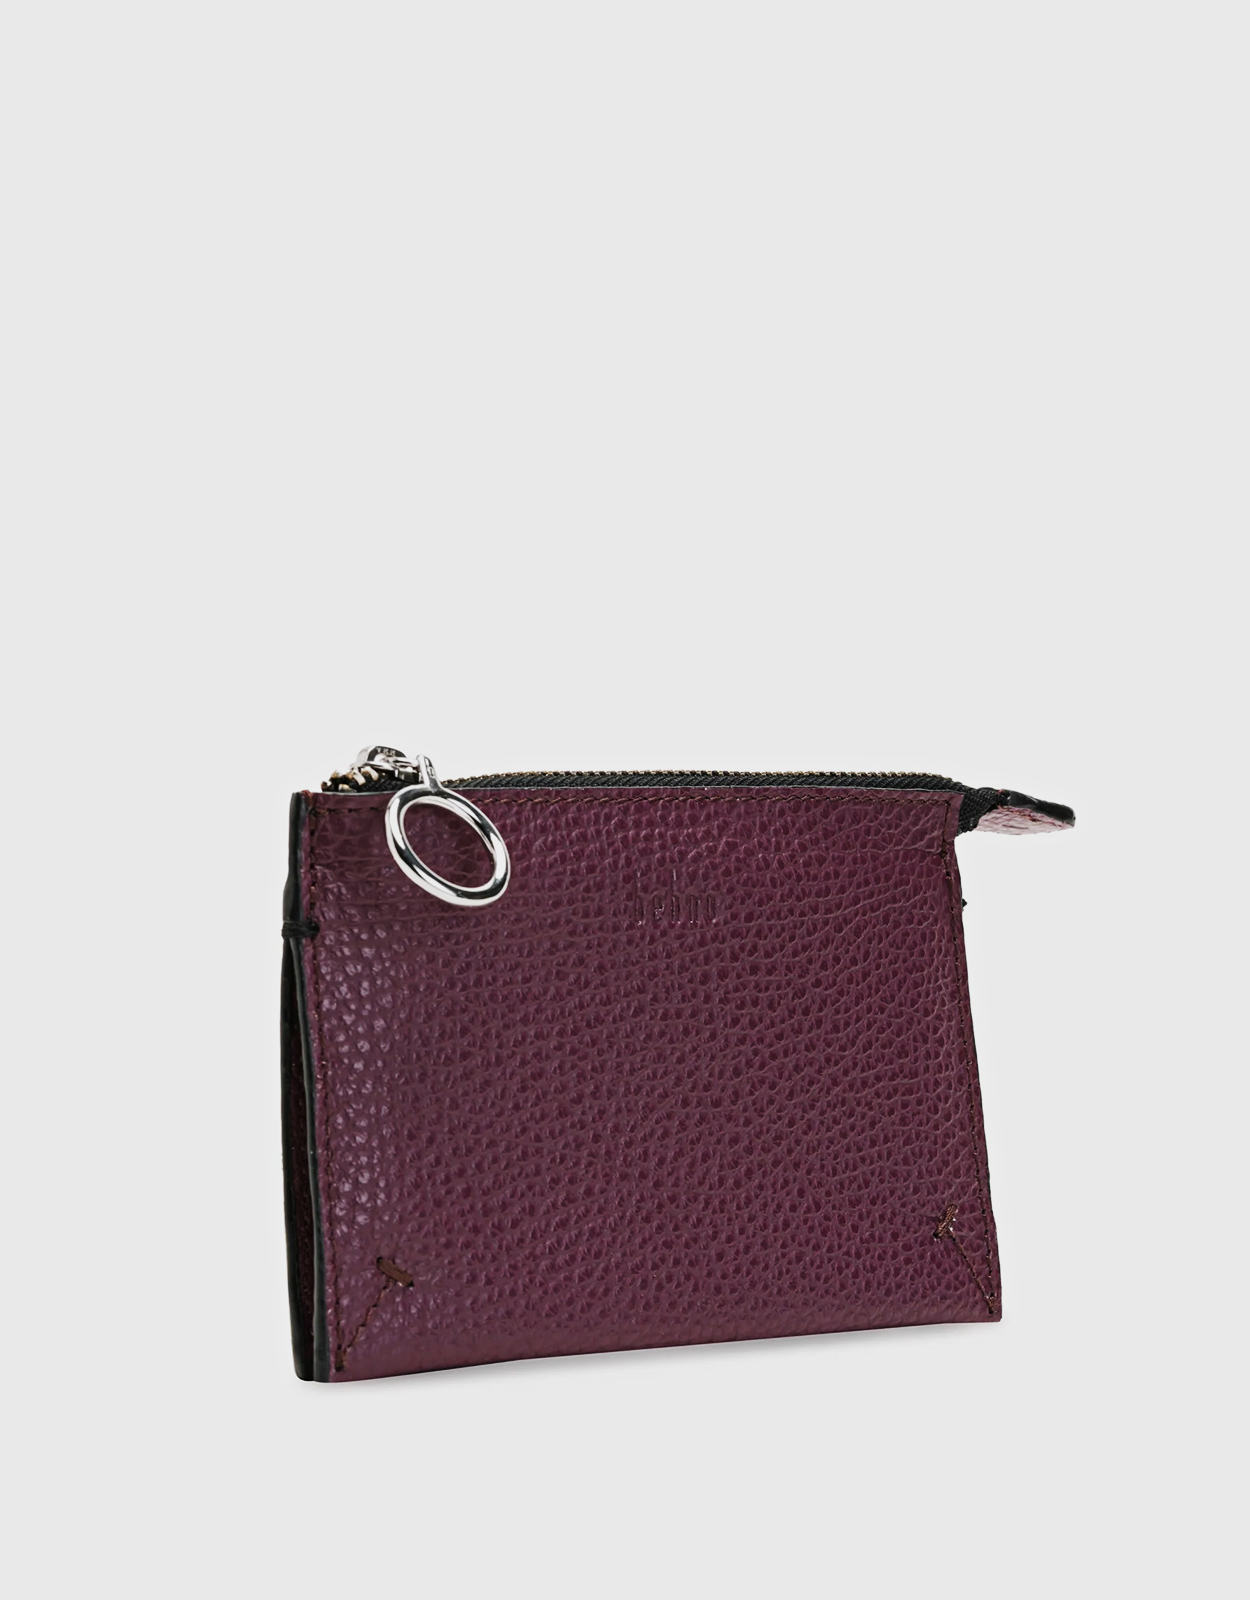 Zippy Wallet - Wallets and Small Leather Goods